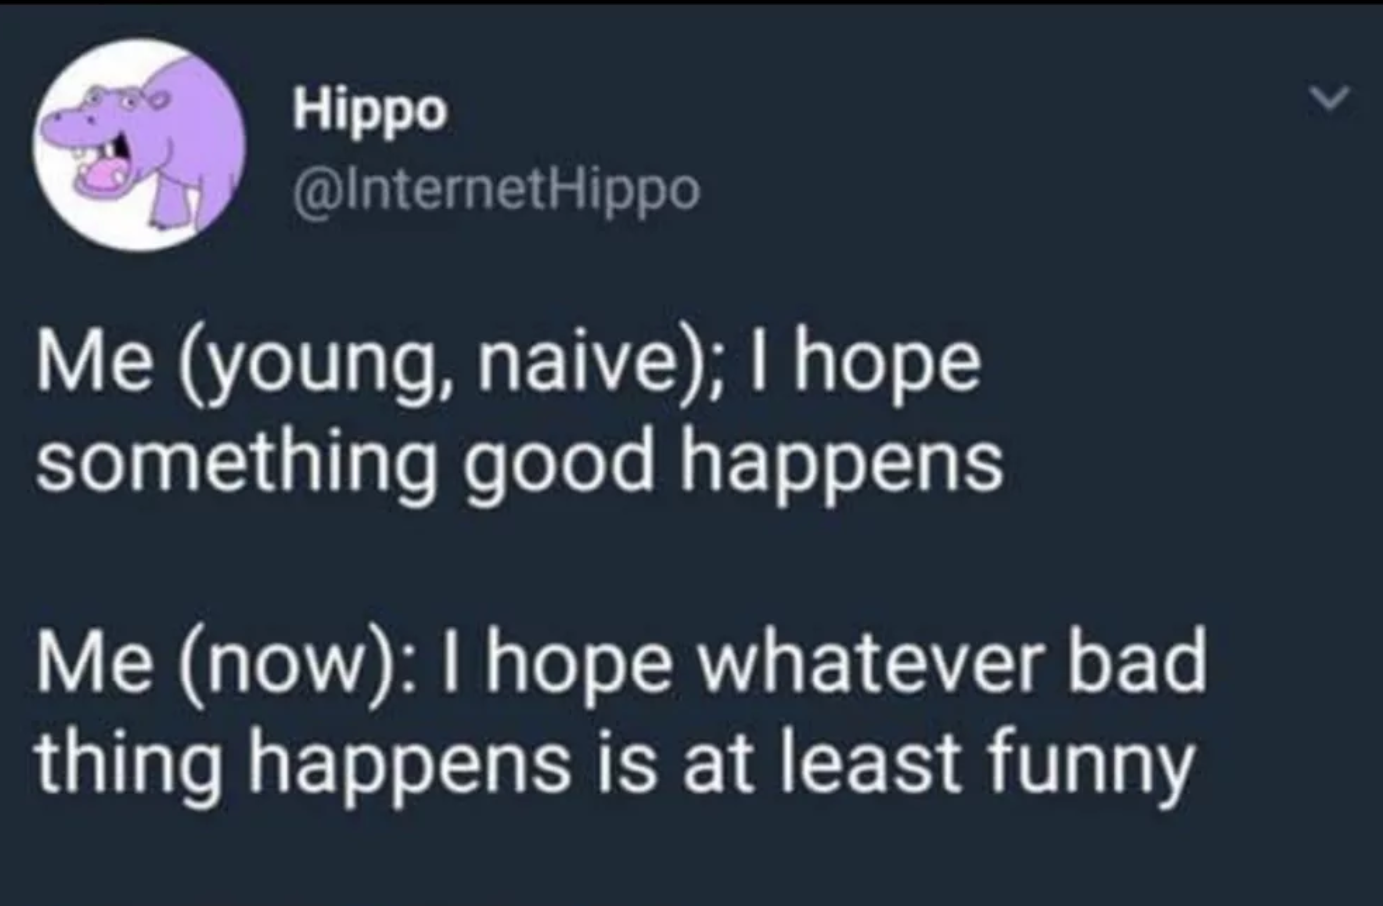 lyrics - Hippo Hippo Me young, naive; I hope something good happens Me now I hope whatever bad thing happens is at least funny